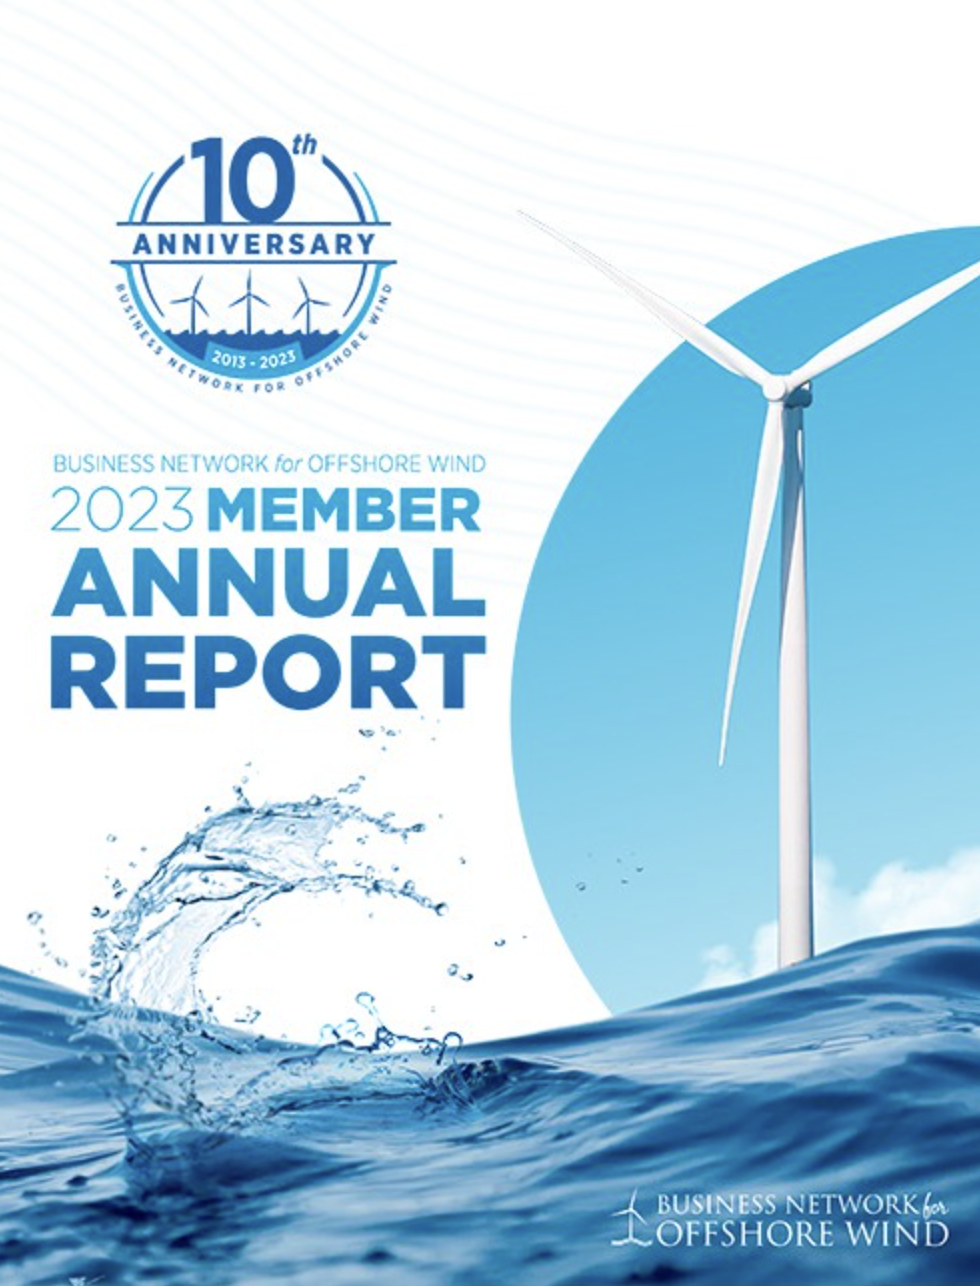 Featured Image: 2023 Member Annual Report